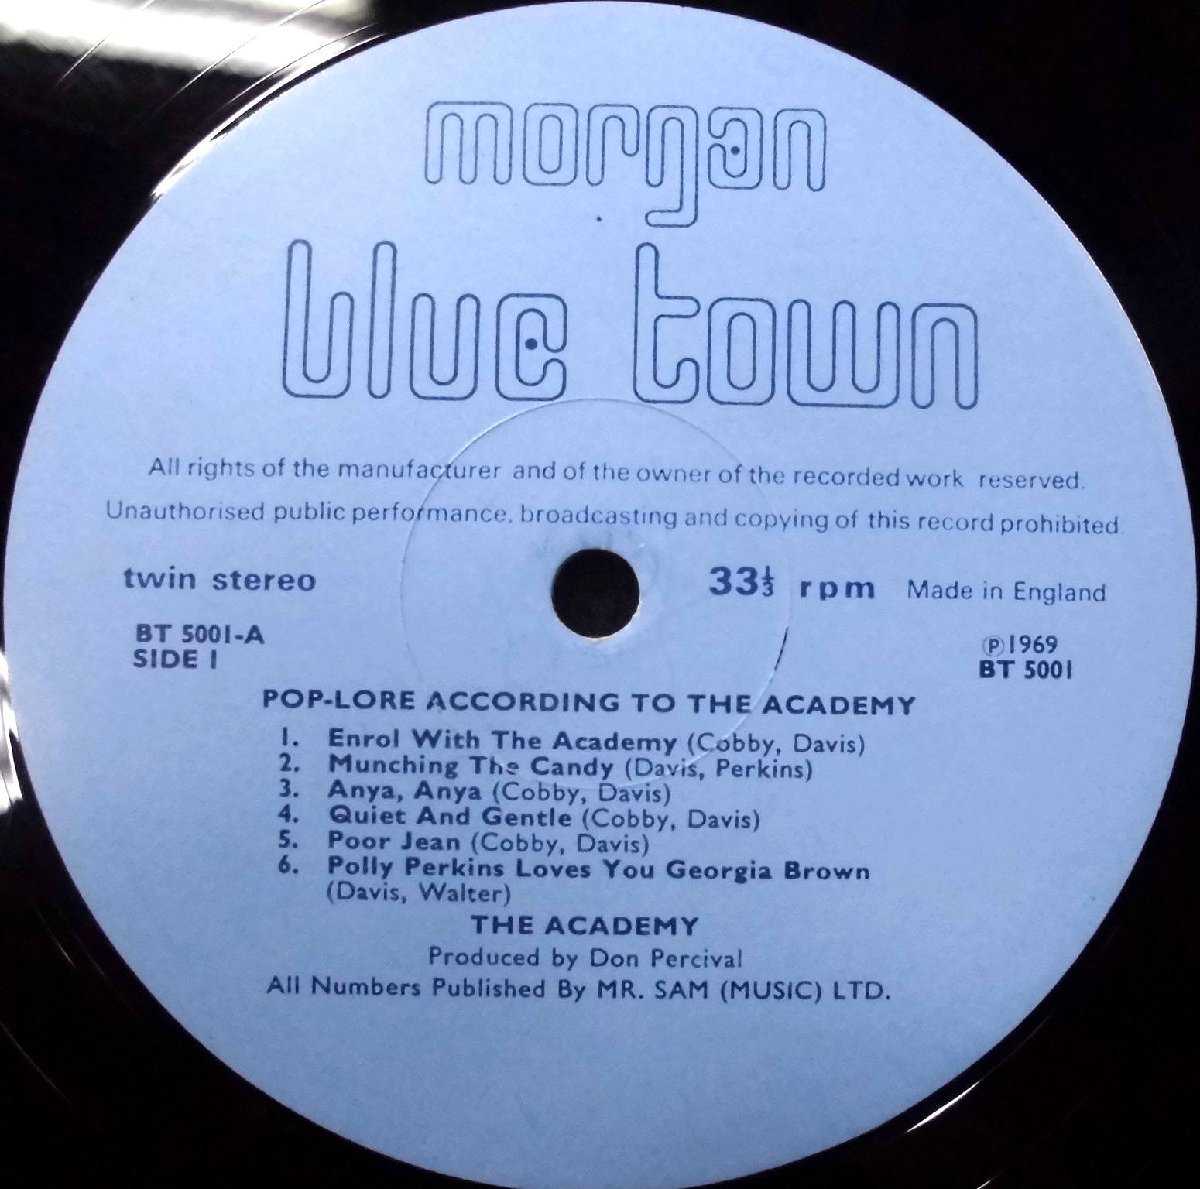 ●UK-Morgan Blue Townオリジナルw/Textured-Cover!! The Academy / Pop-Lore According To The Academy_画像7